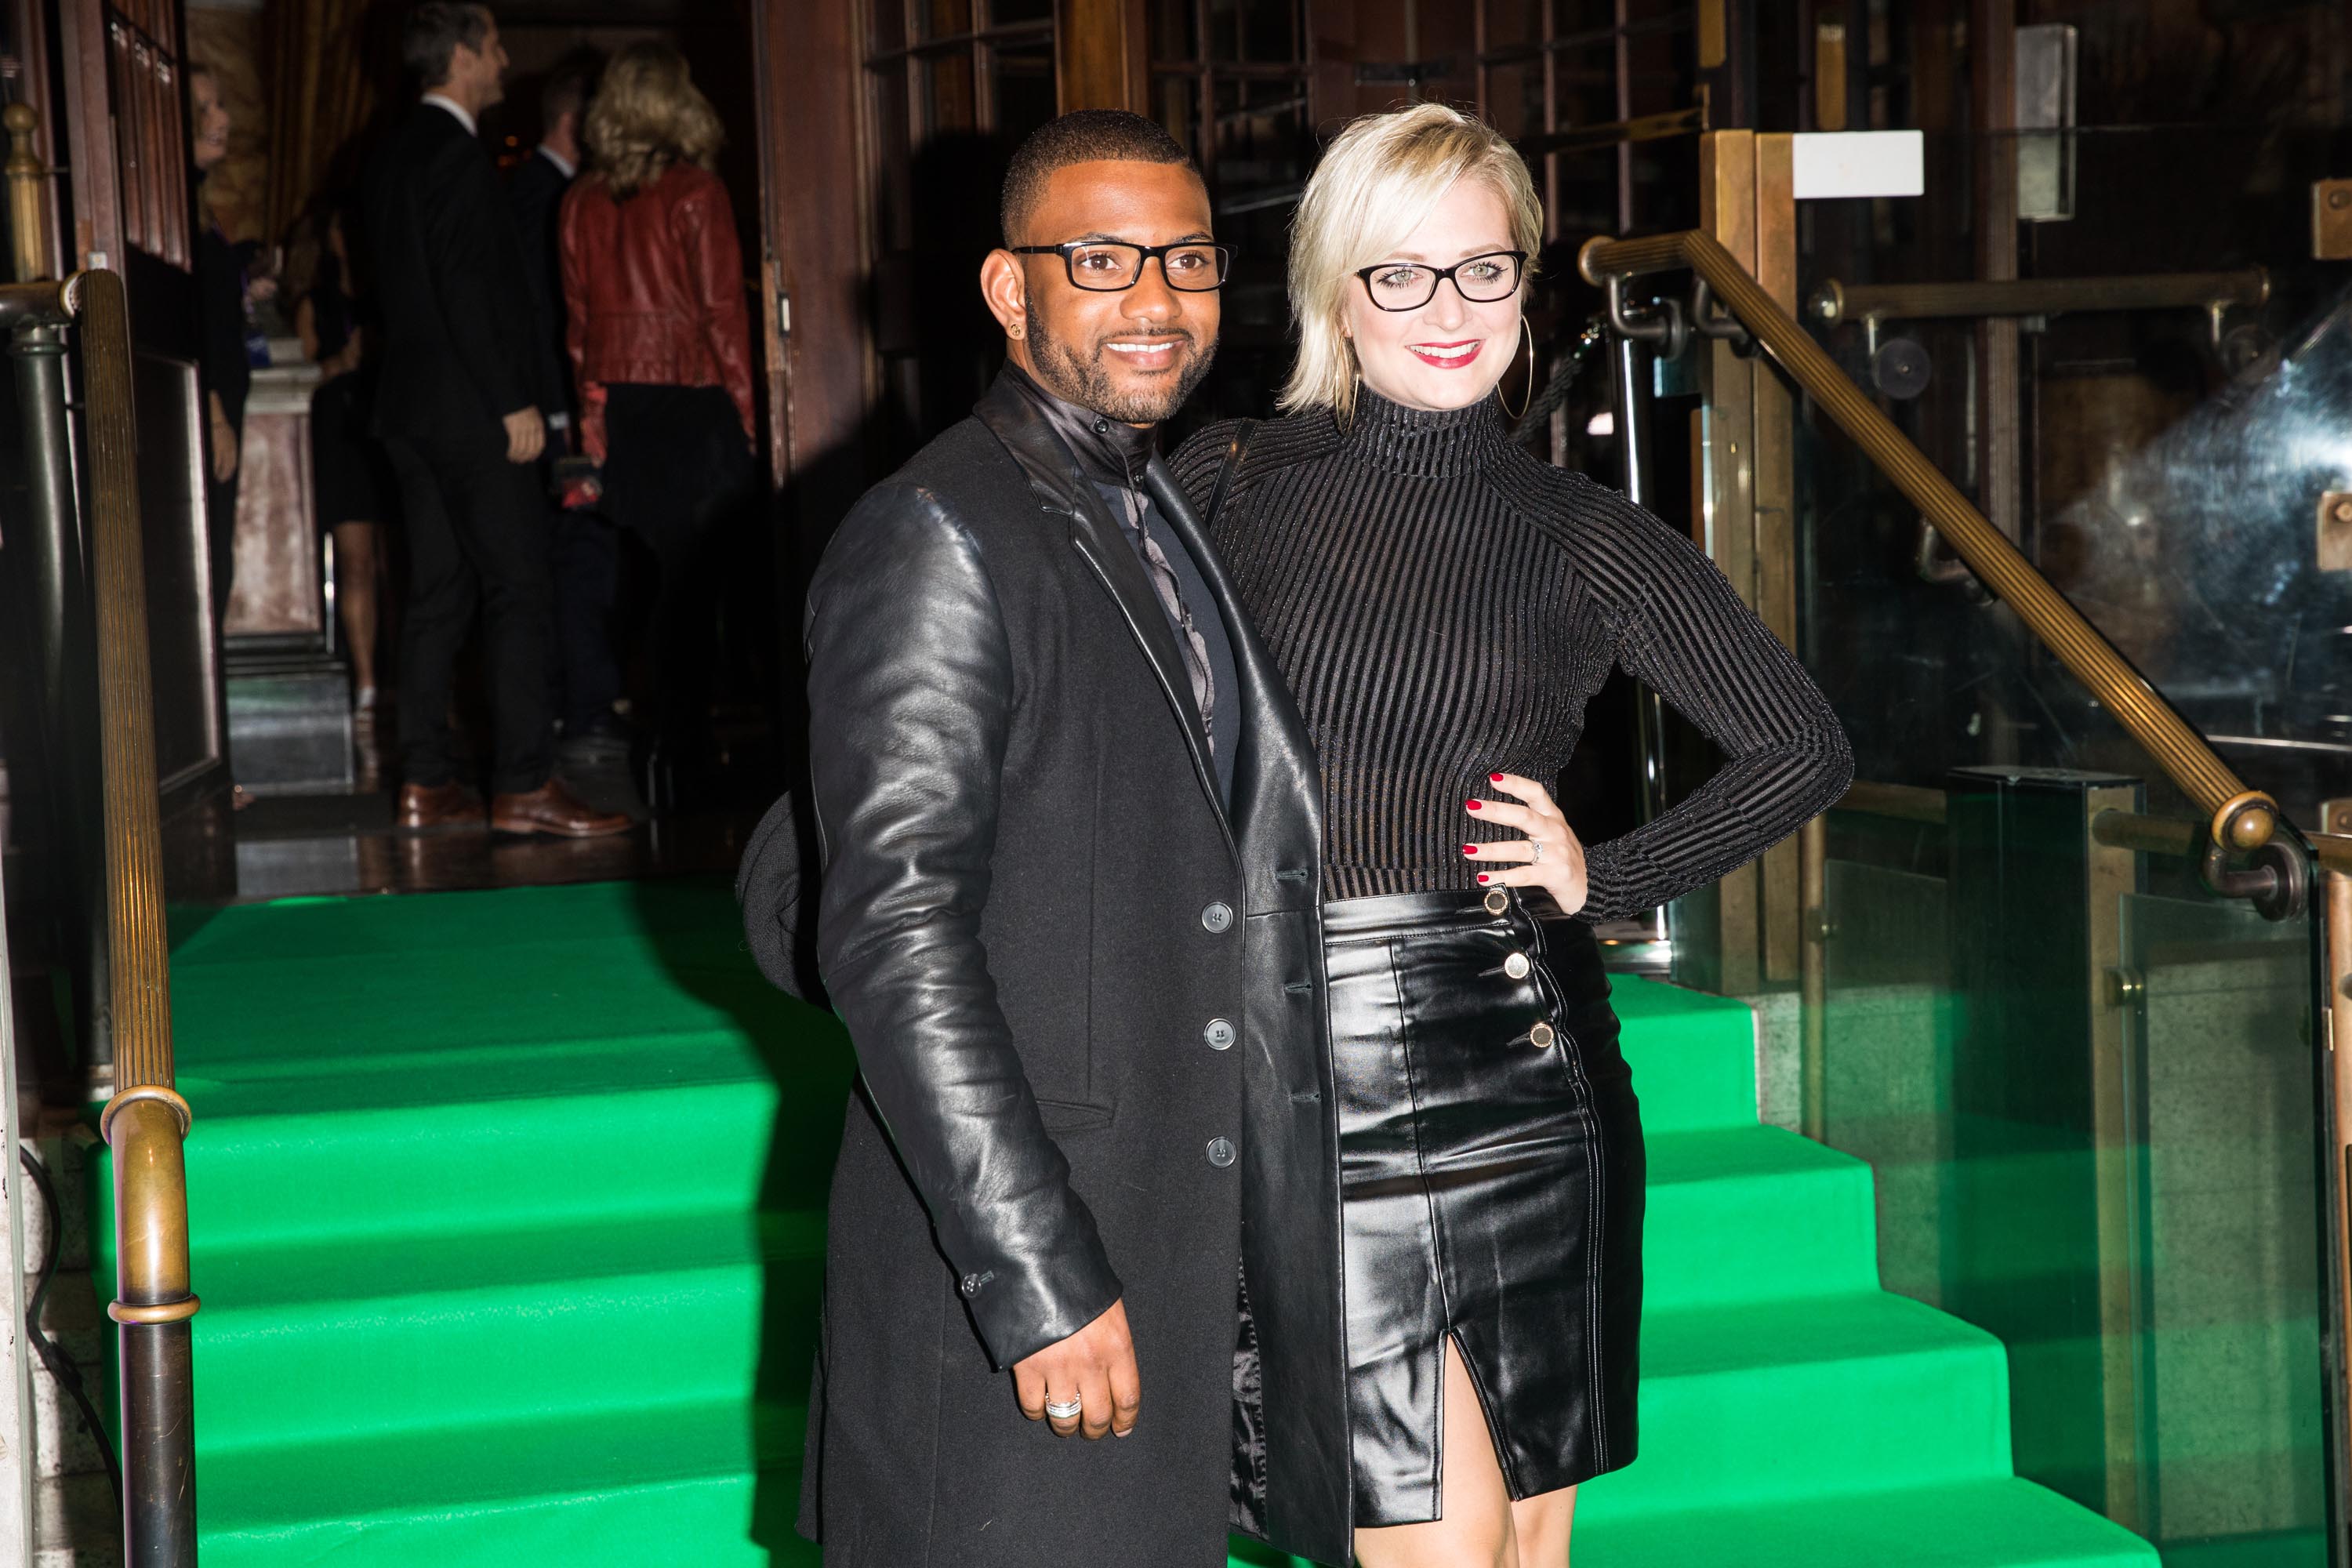 Chloe Gill attends the Spectacle Wearer of the Year awards